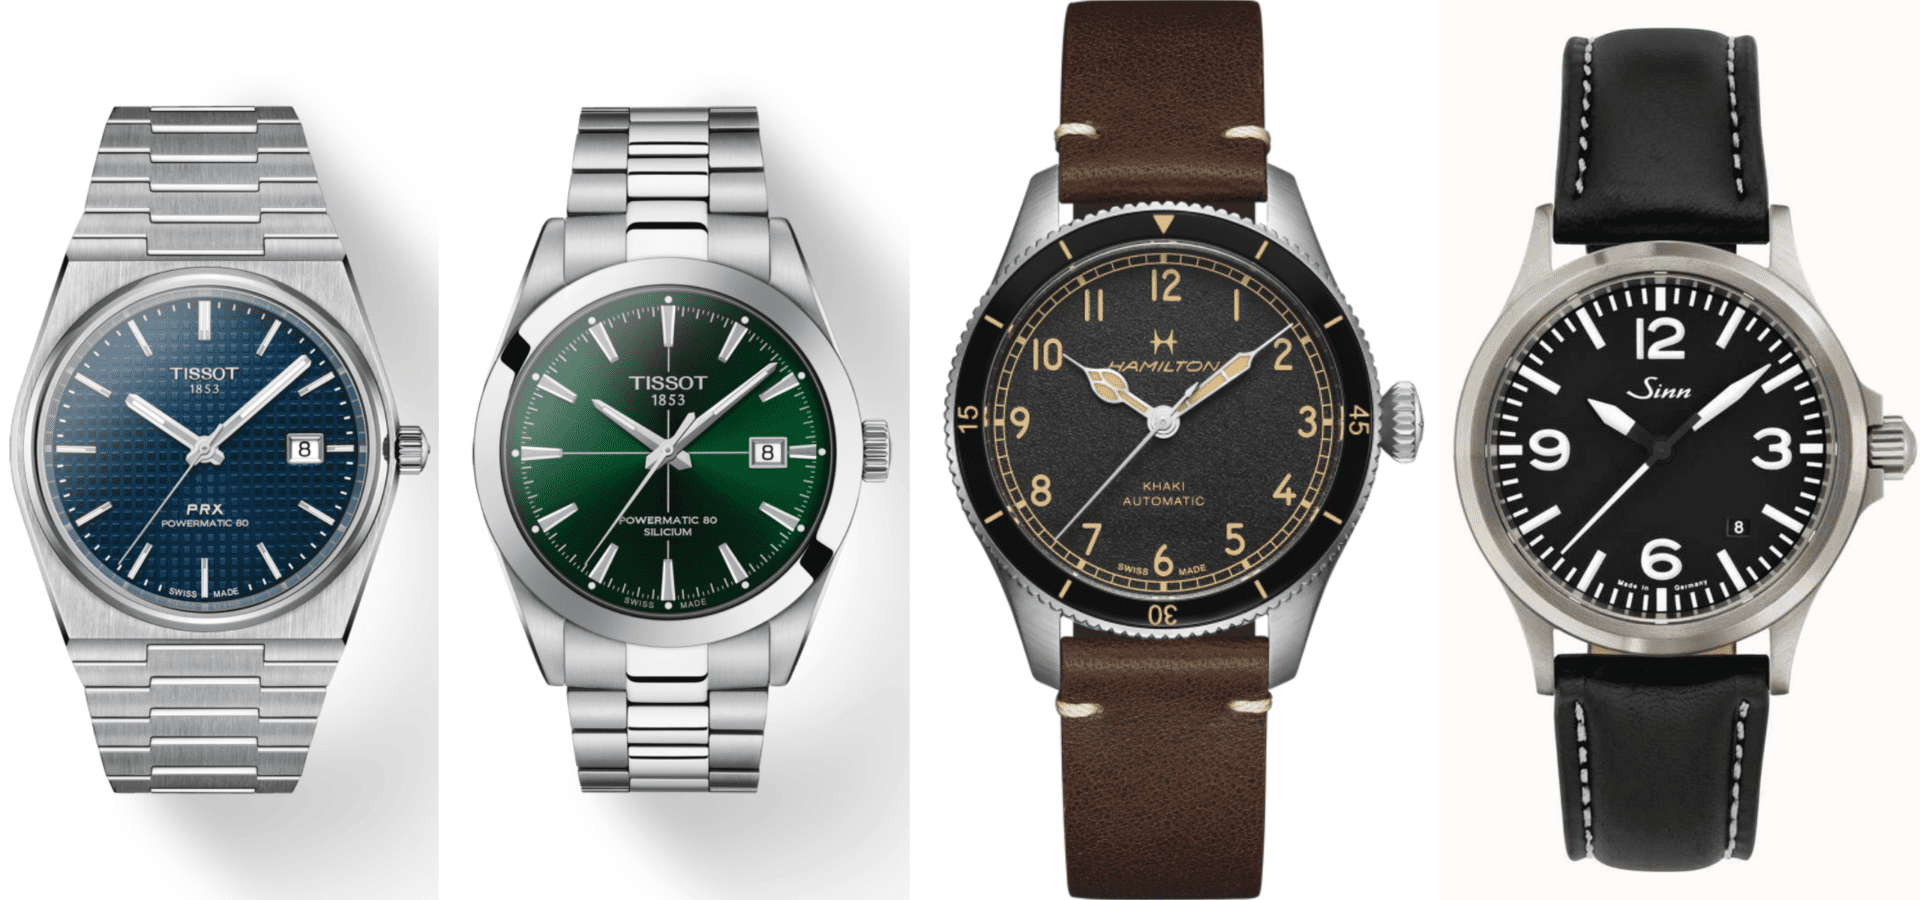 ZACH'S MAILBAG: What are the best watches between $1,000-$1,500